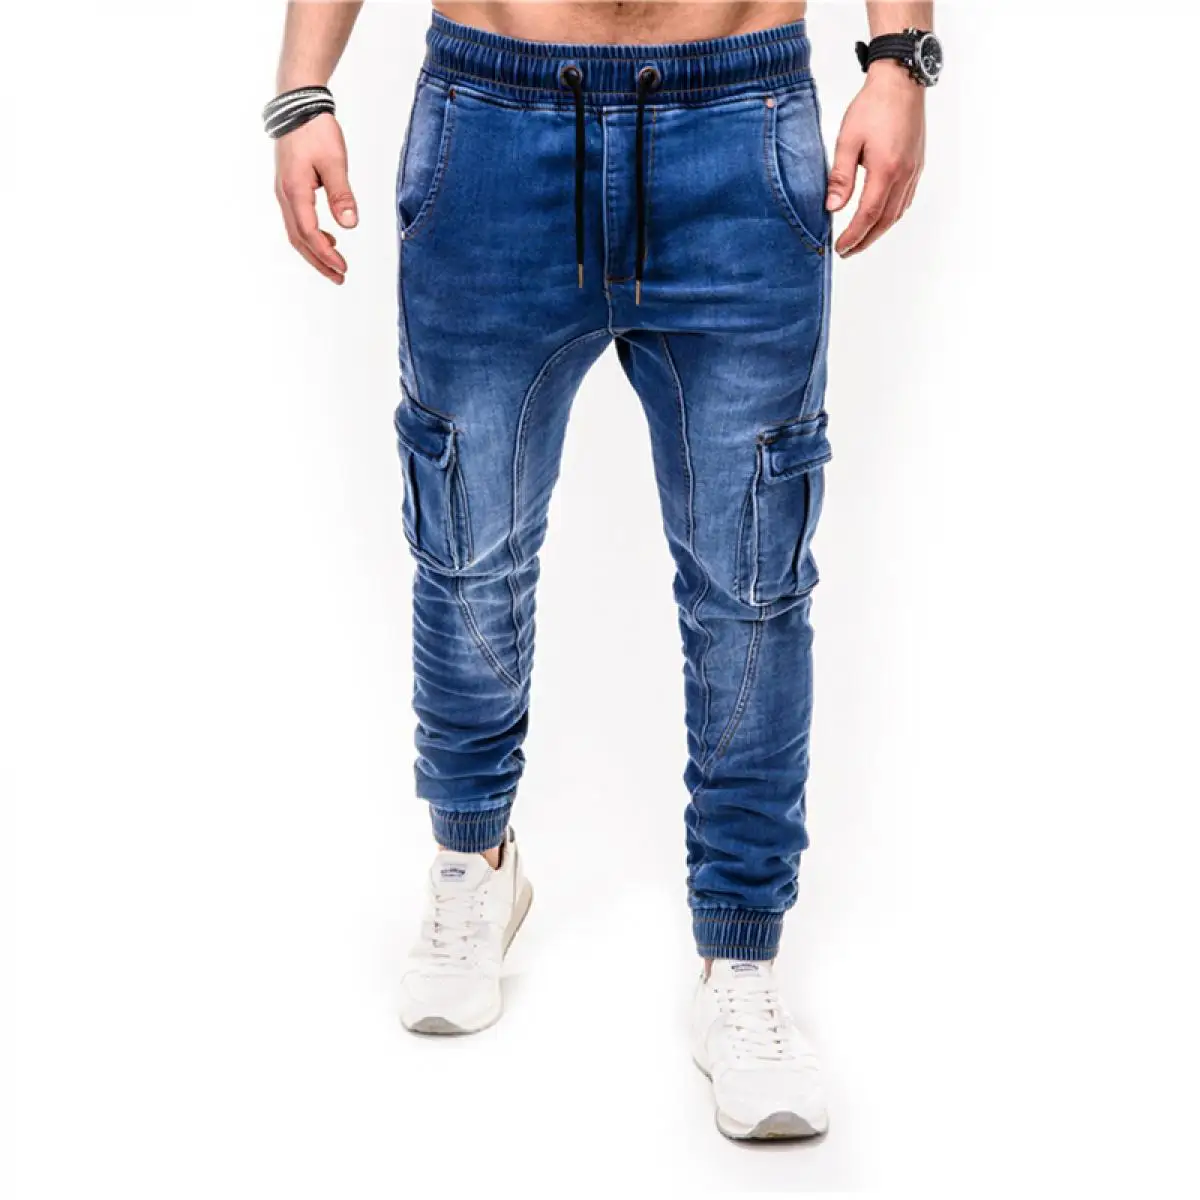 

Blue Vintage Man Jeans Business Casual Classic Style Denim Male Cargo Pants More Pockets Frenum Ankle Banded Casual Pants S-3Xl